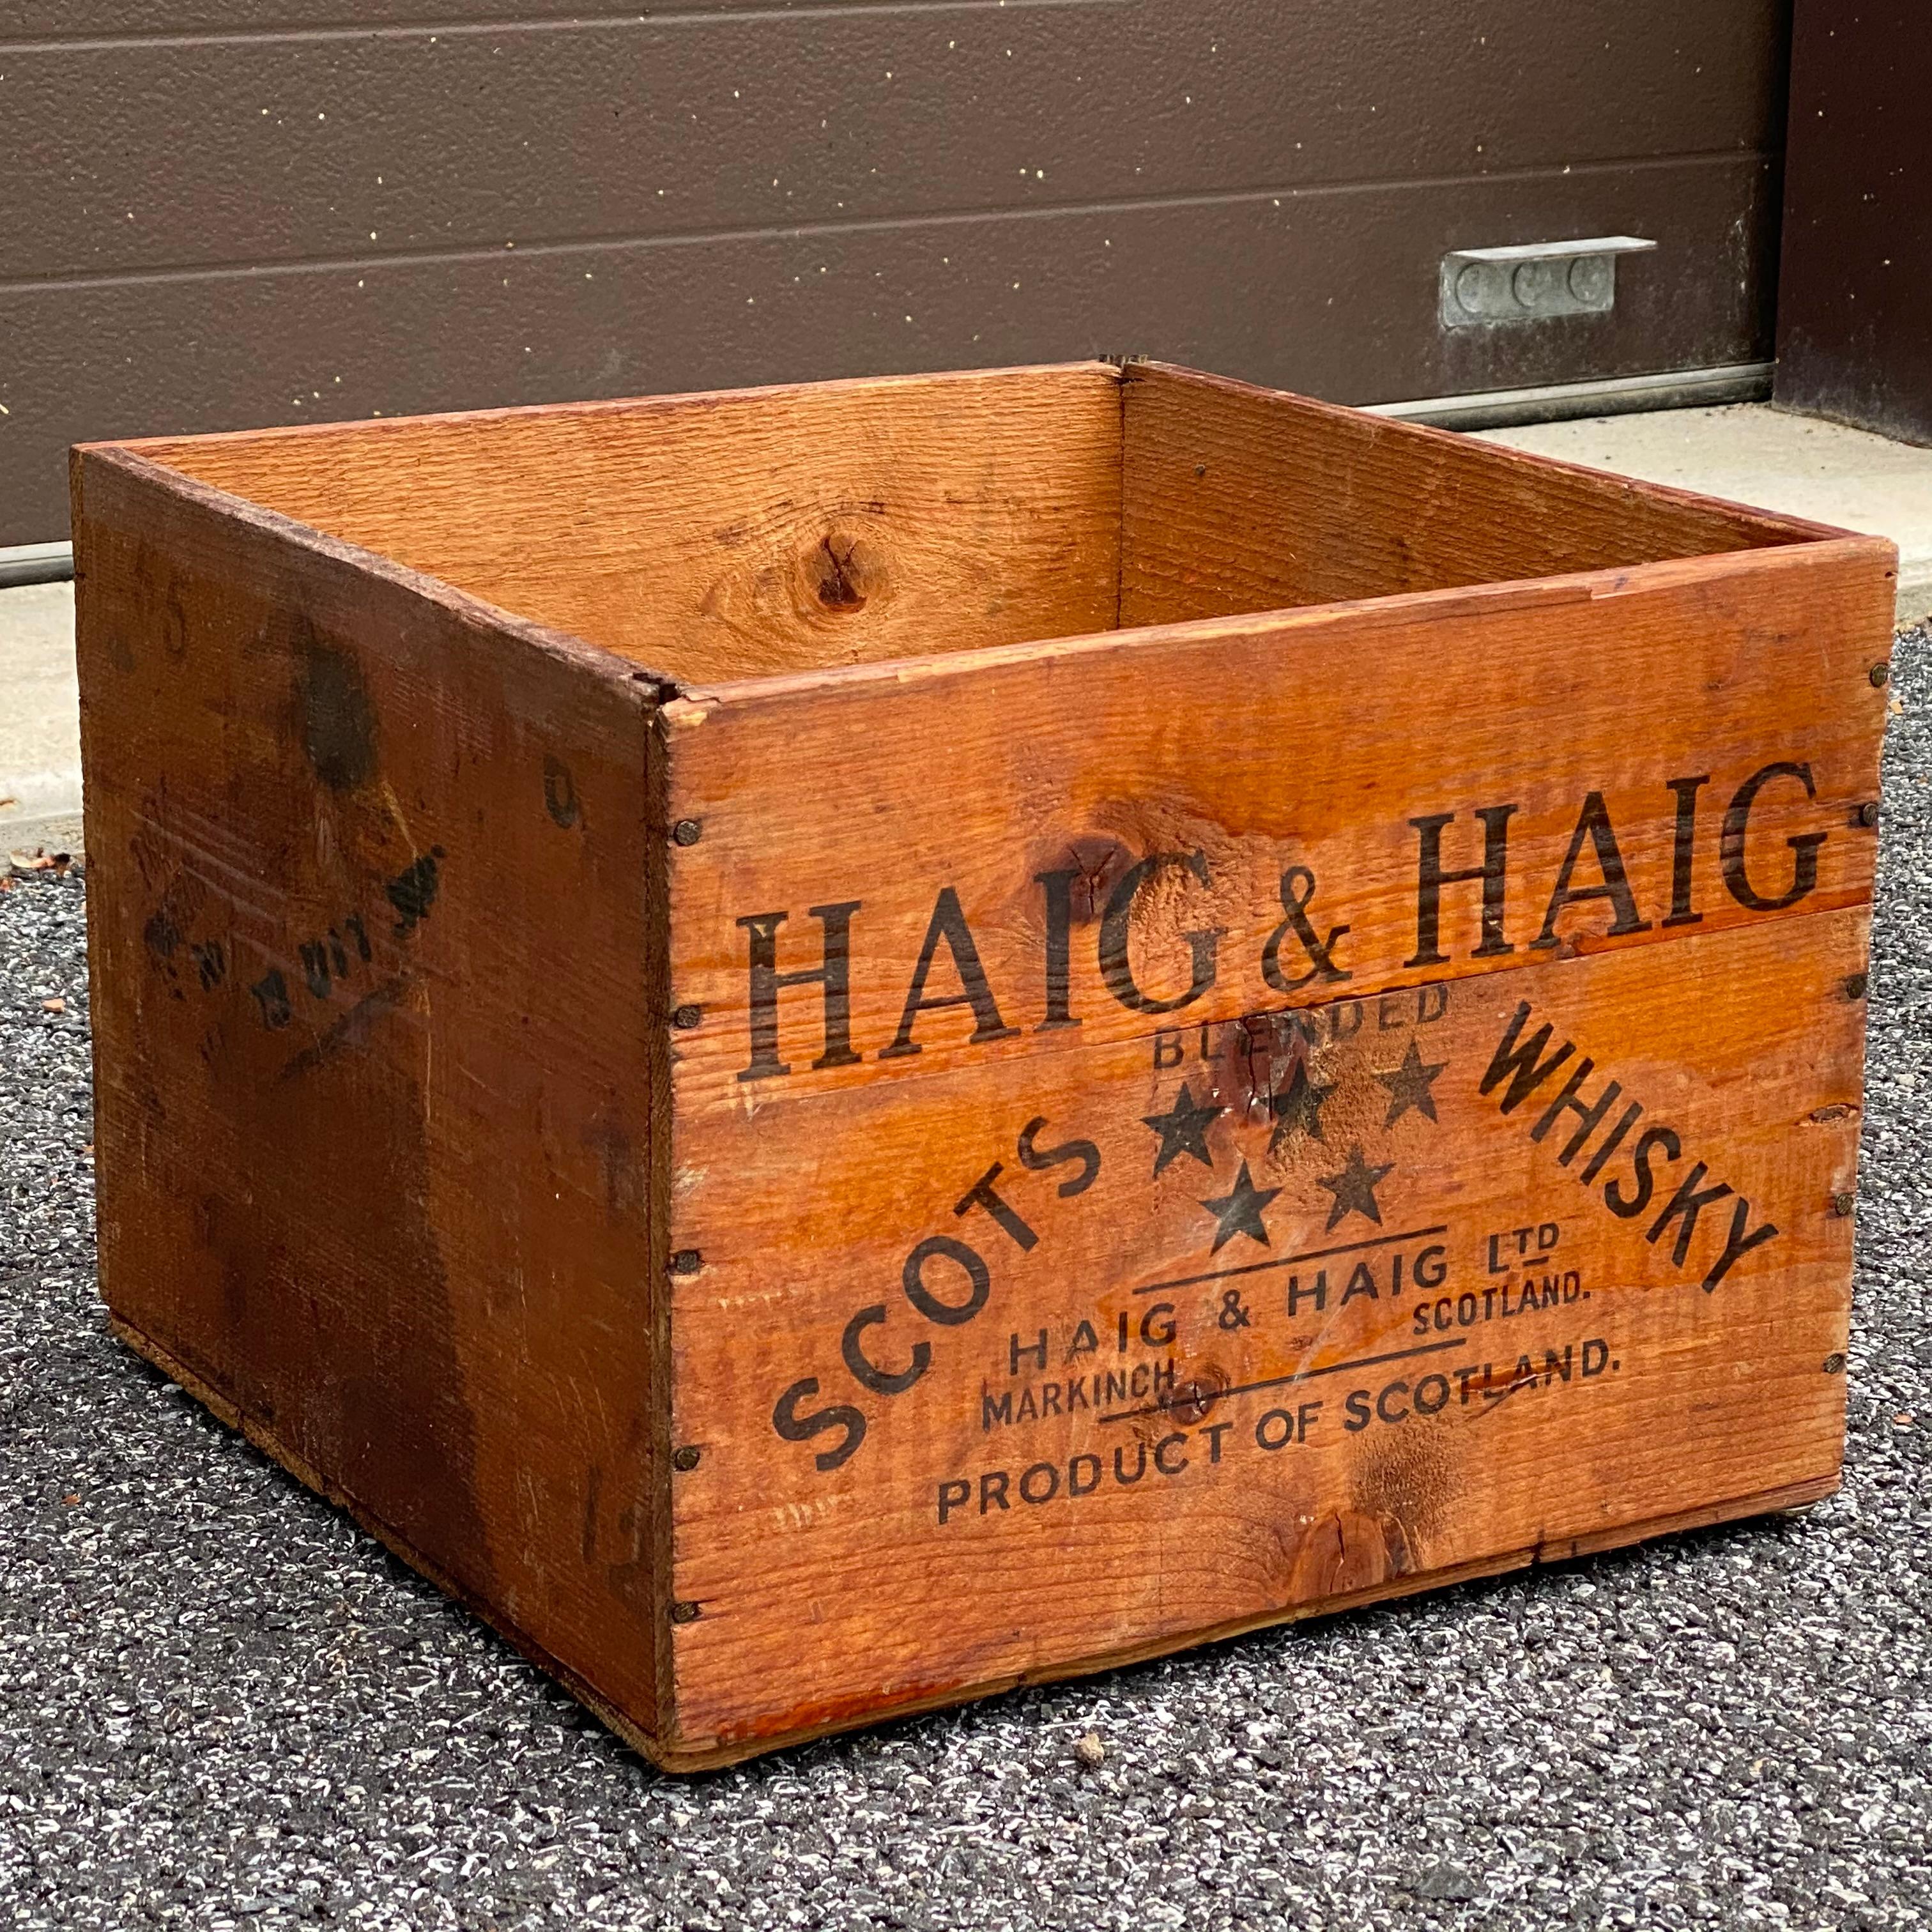 Vintage Haig & Haig wooden whiskey crate with lettering on four sides circa 1950s.
Interior dimensions roughly
12.375” x 12.5” x 9.25”h